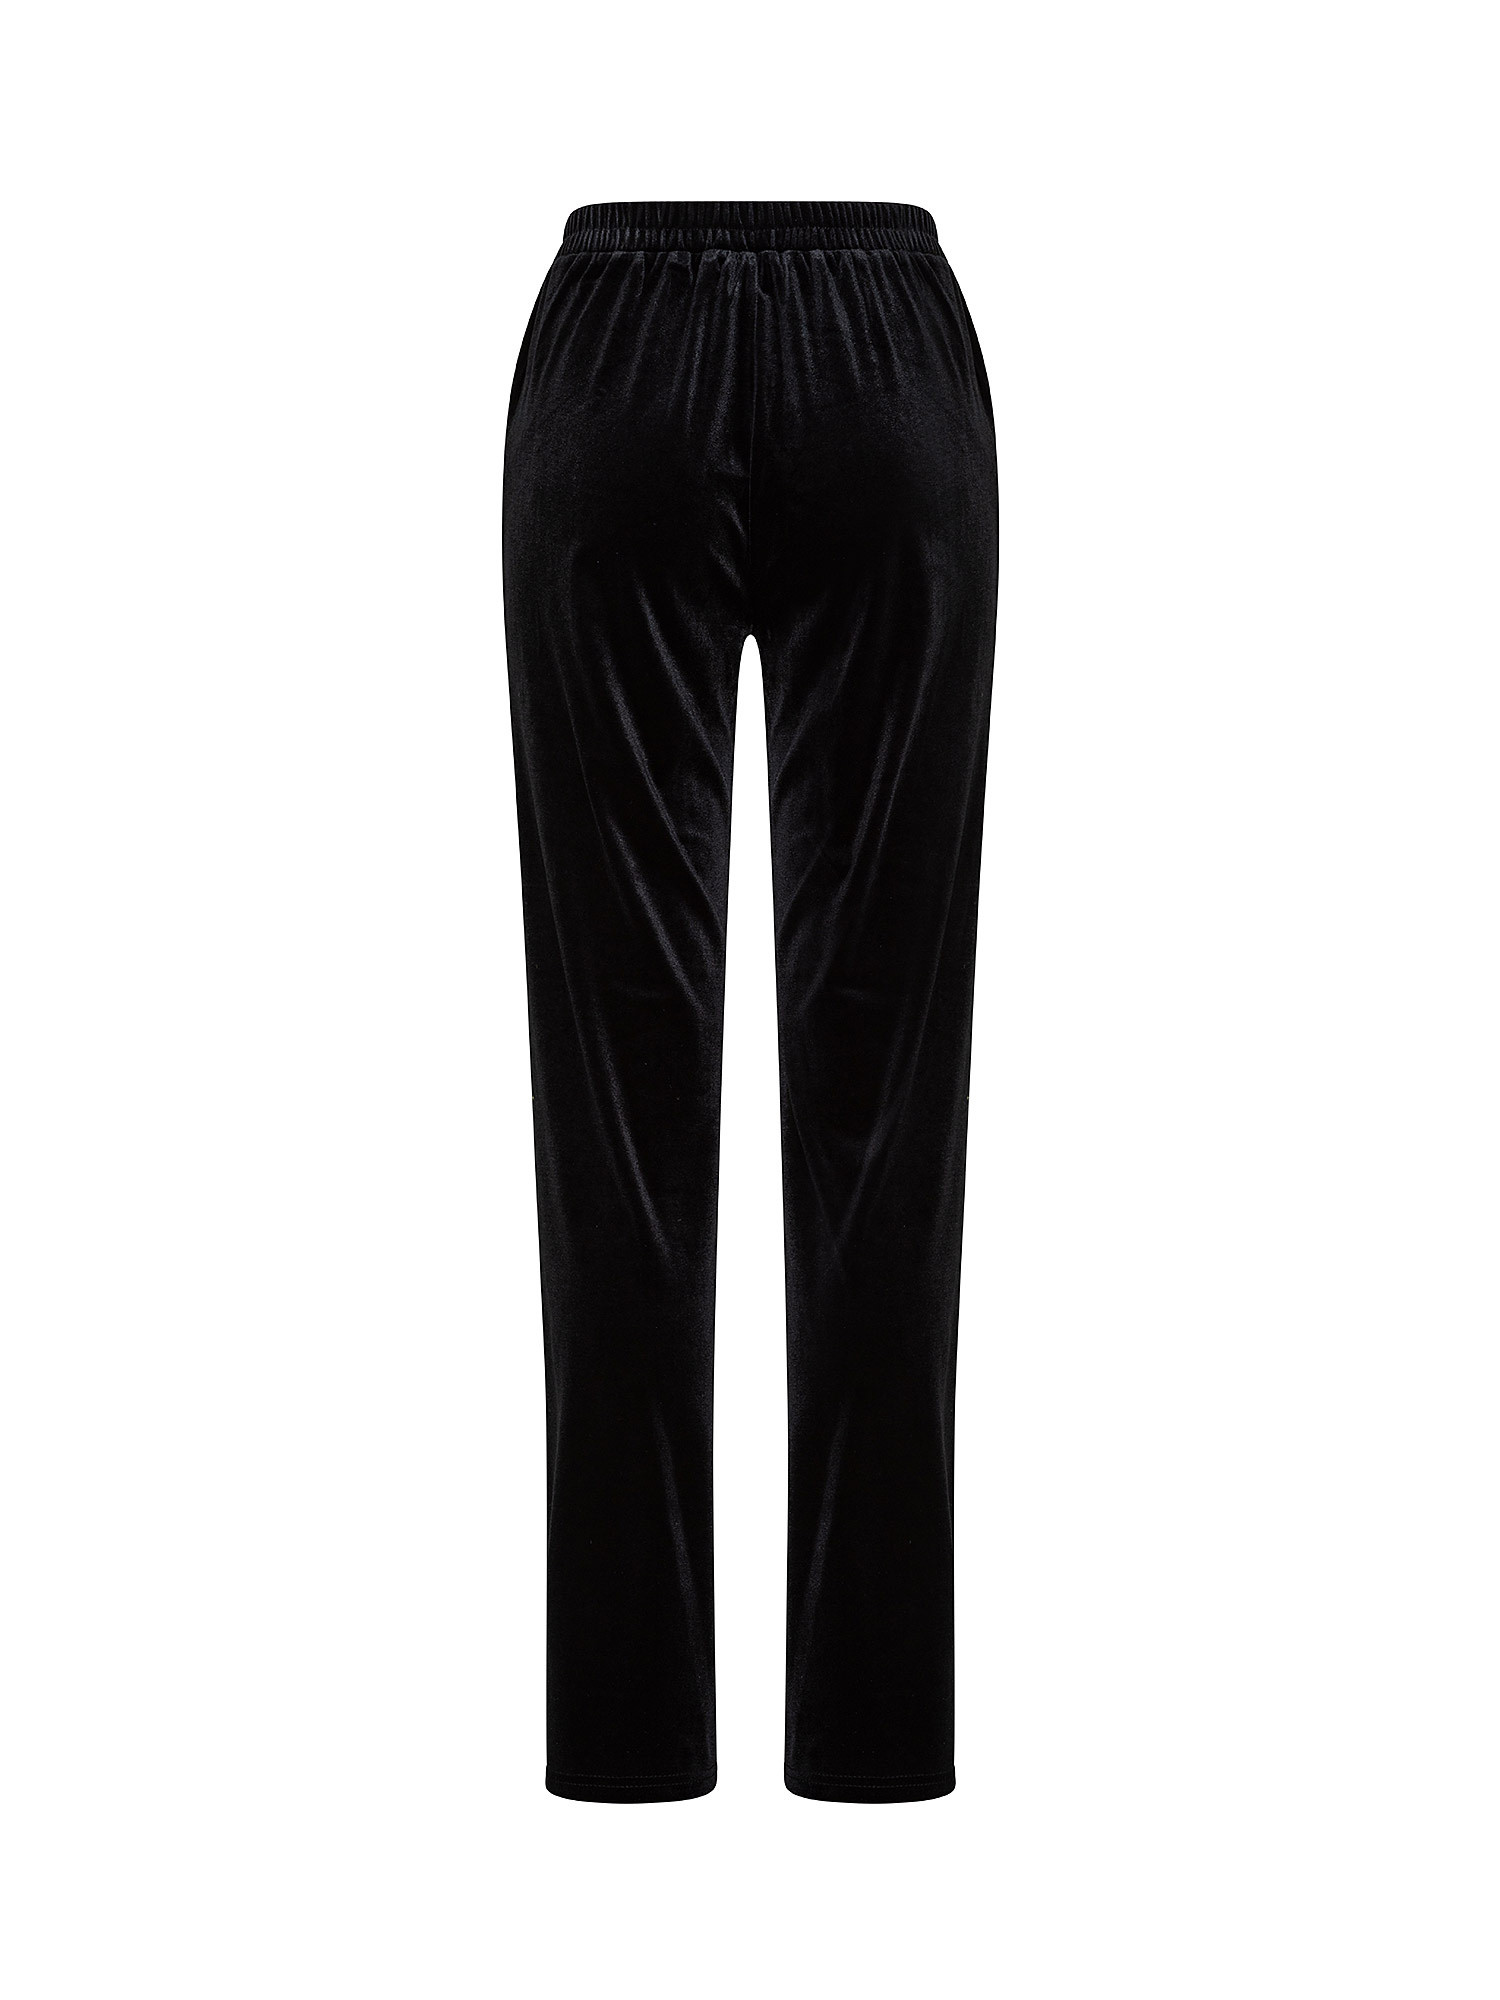 Chenille trousers, Black, large image number 1